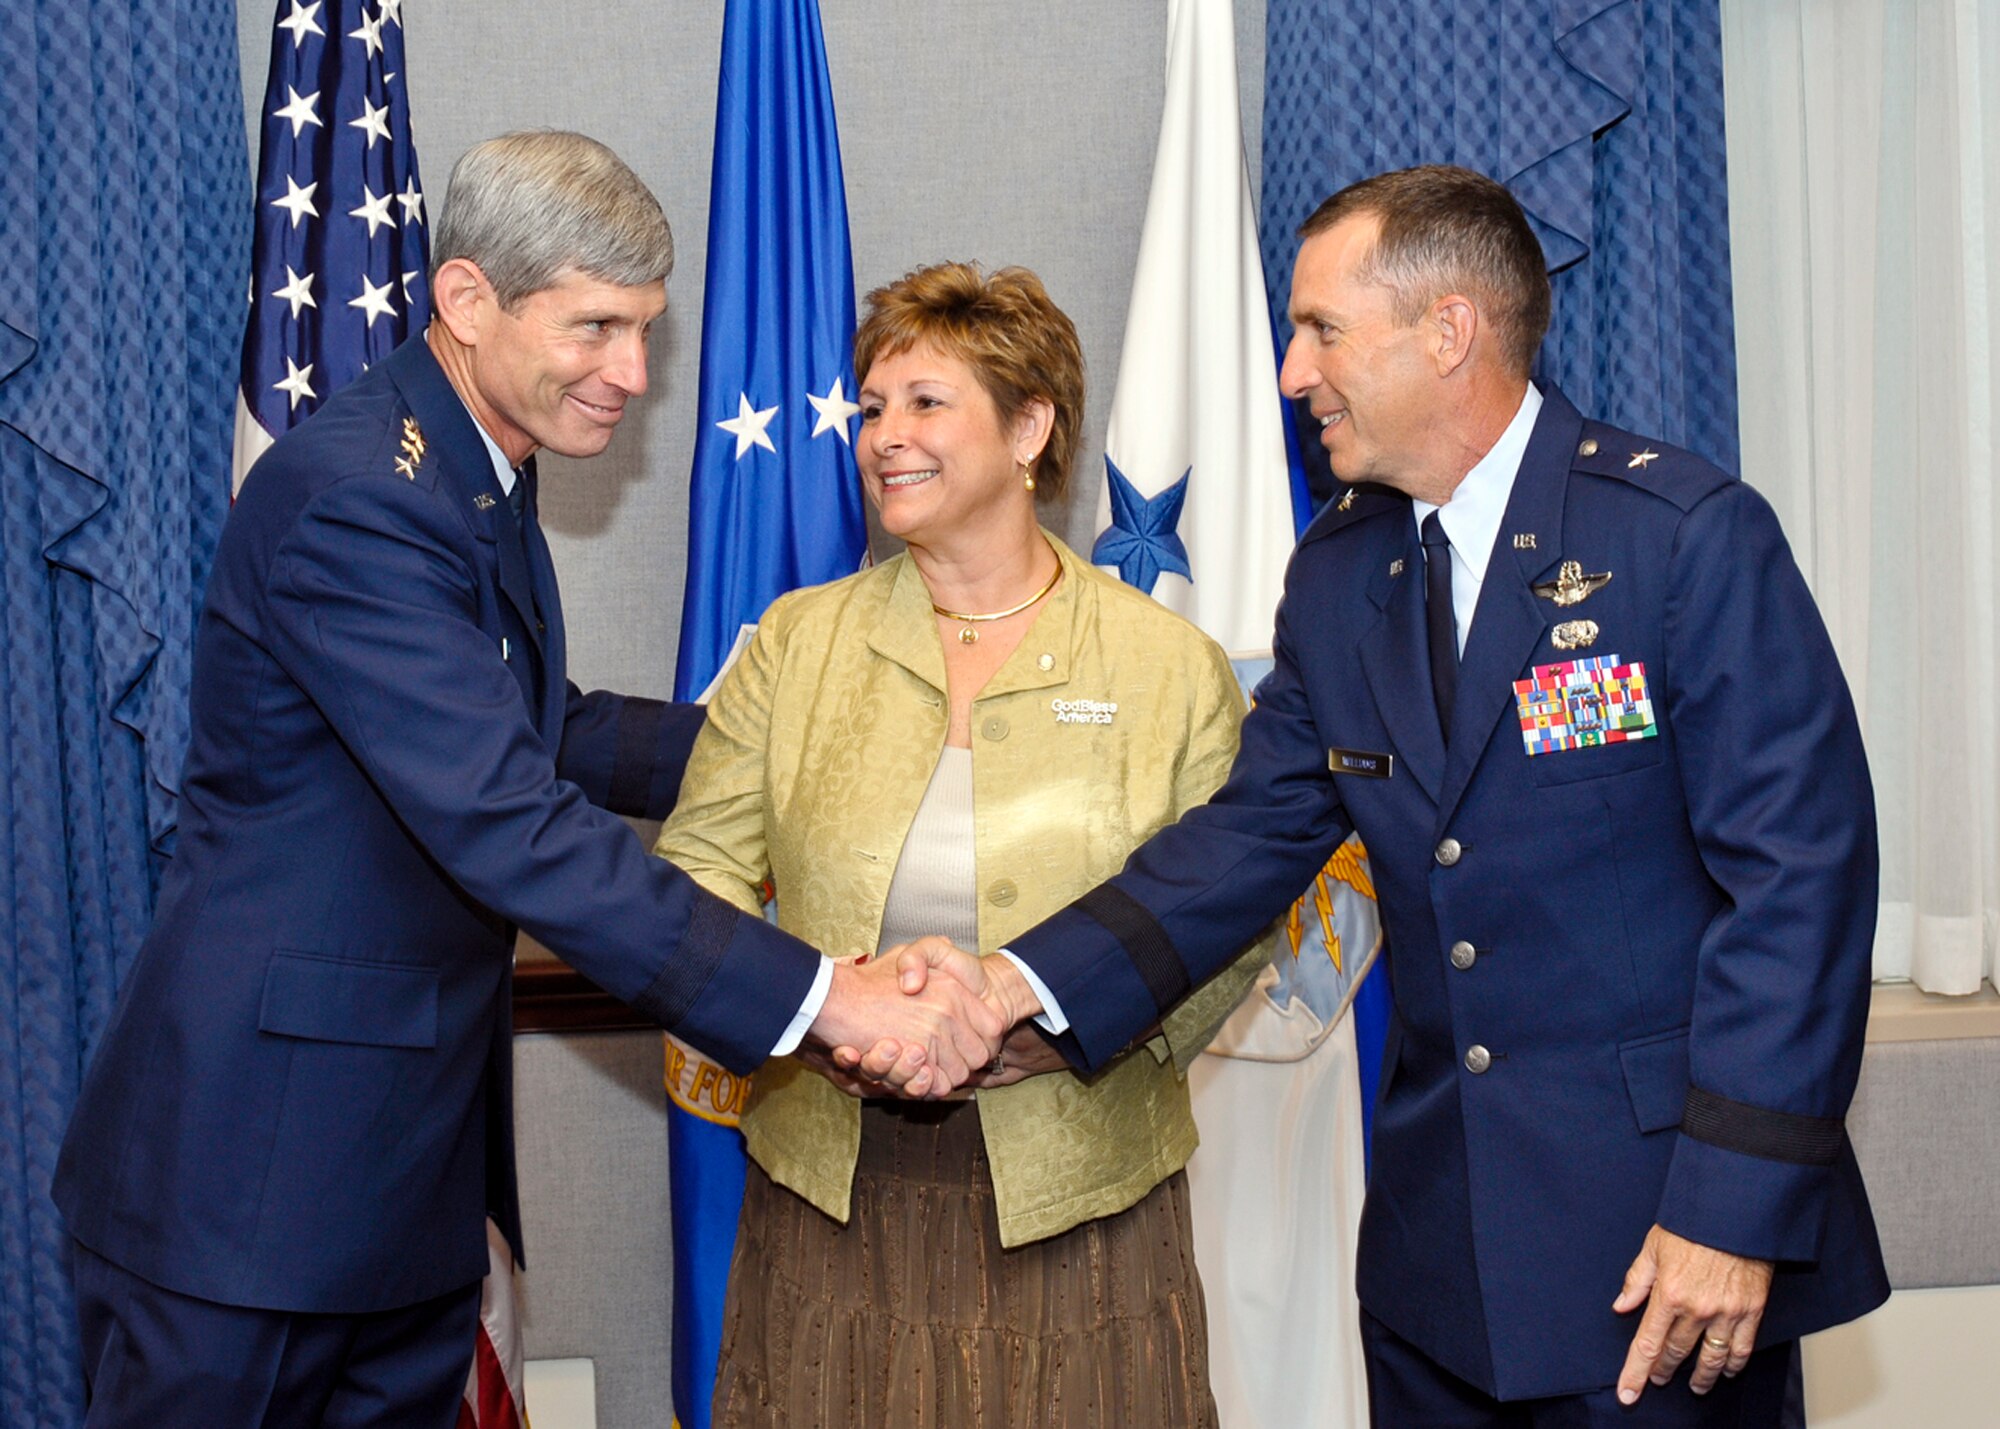 Air Force Chief of Staff Gen. Norton Schwartz congratulates Brig. Gen. Brett and Marianne Williams as the recipients of the 2009 General and Mrs. Jerome F. O'Malley Award during a Pentagon ceremony Sept. 11, 2009.  (U.S. Air Force photo/Michael J Pausic)